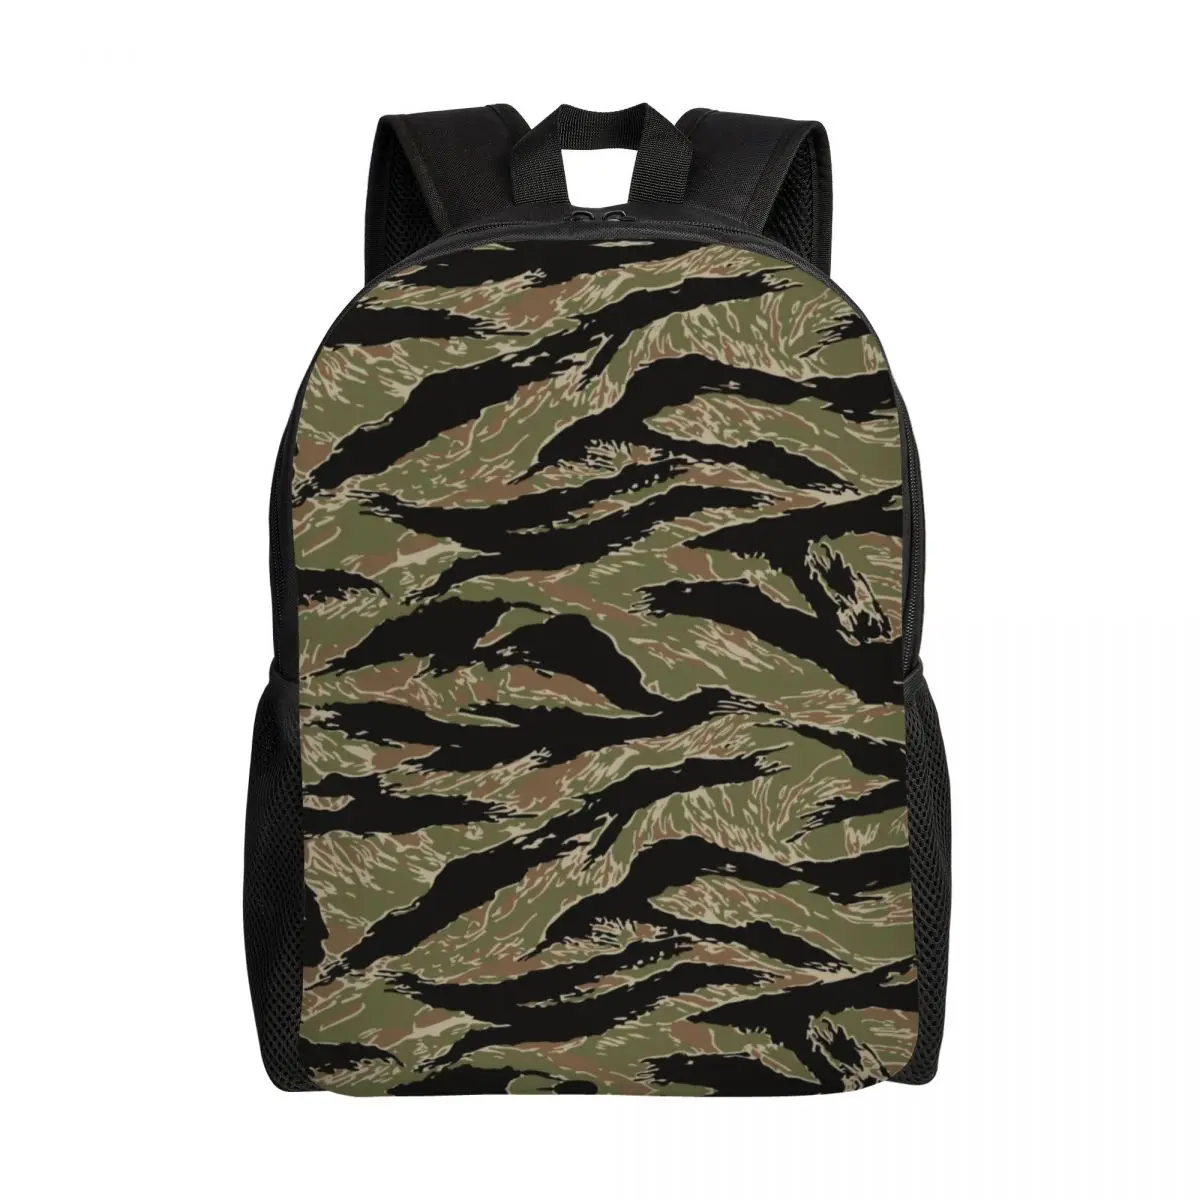 

Tiger Stripe Camo Backpacks for Boys Girls Military Tactical Camouflage School College Travel Bags Bookbag Fits 15 Inch Laptop